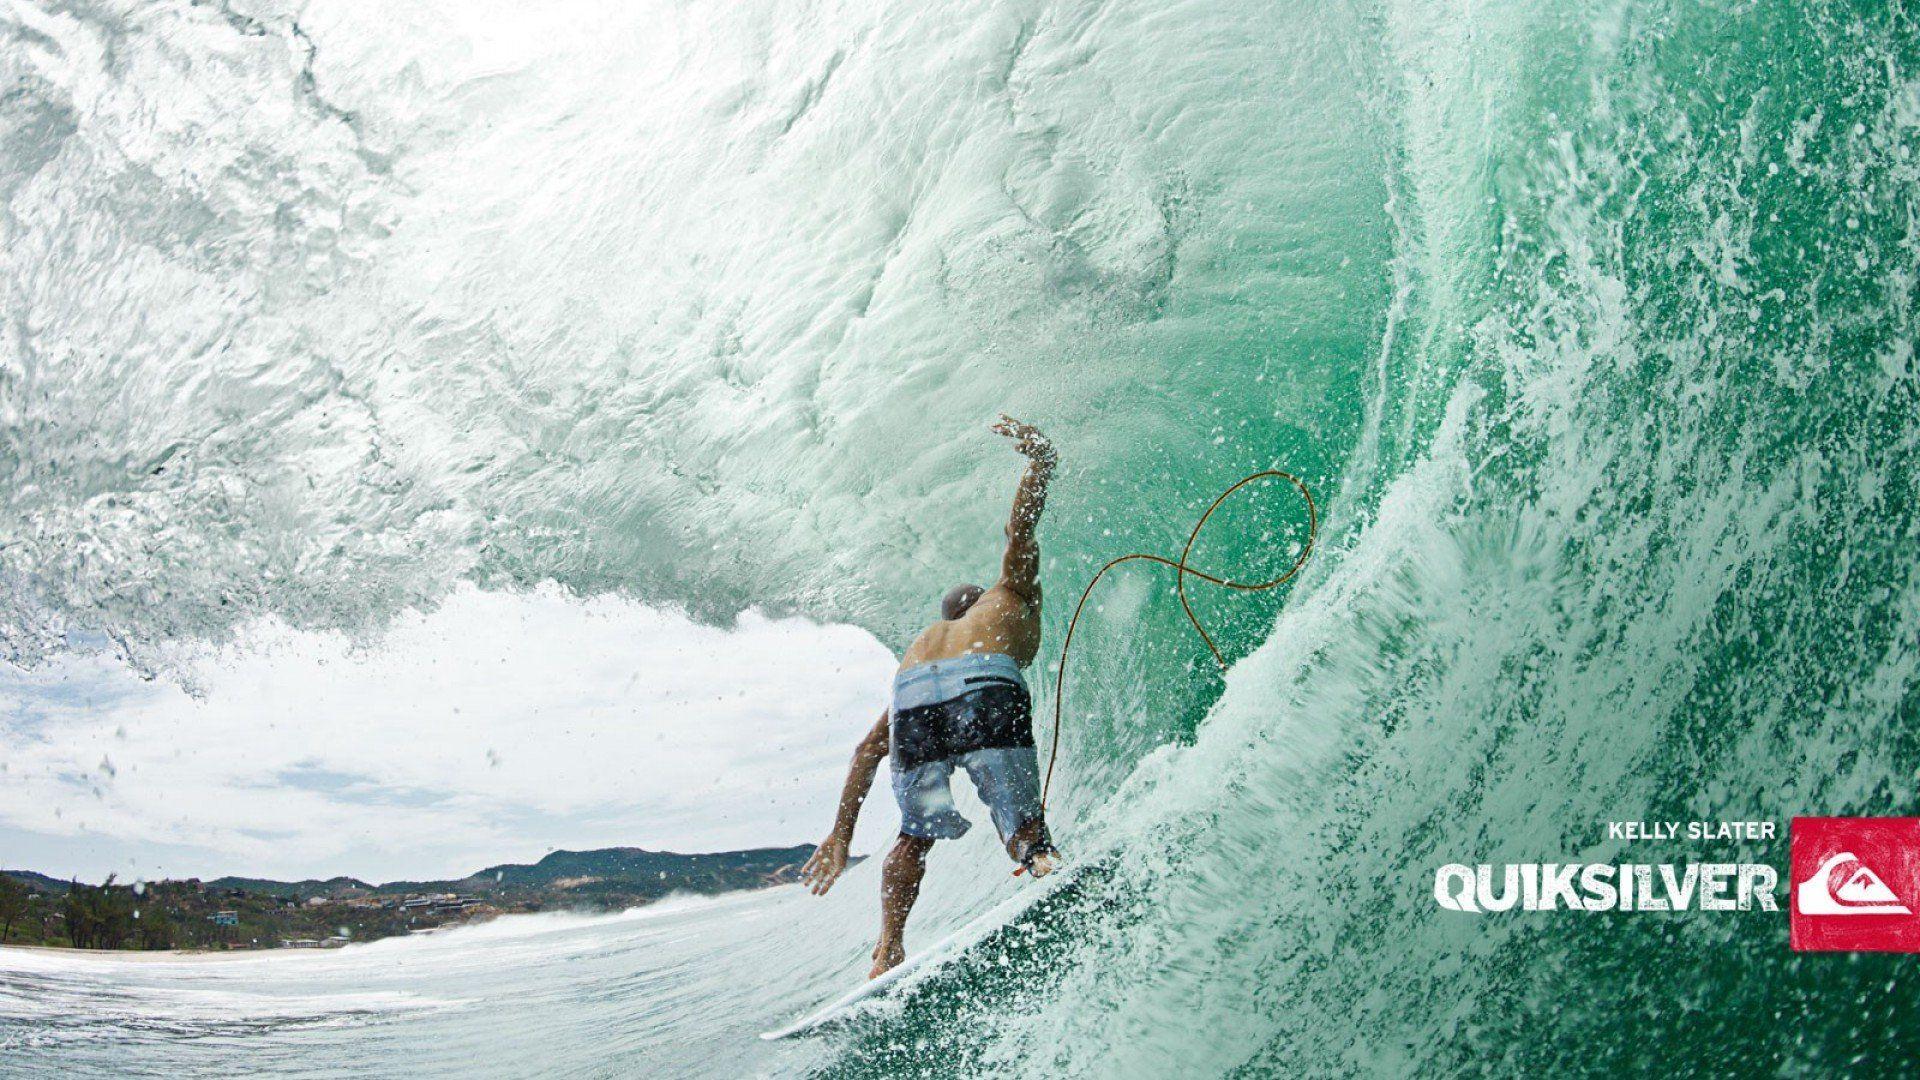 Superb HD Quality Wallpaper's Collection: Quiksilver Wallpaper 36